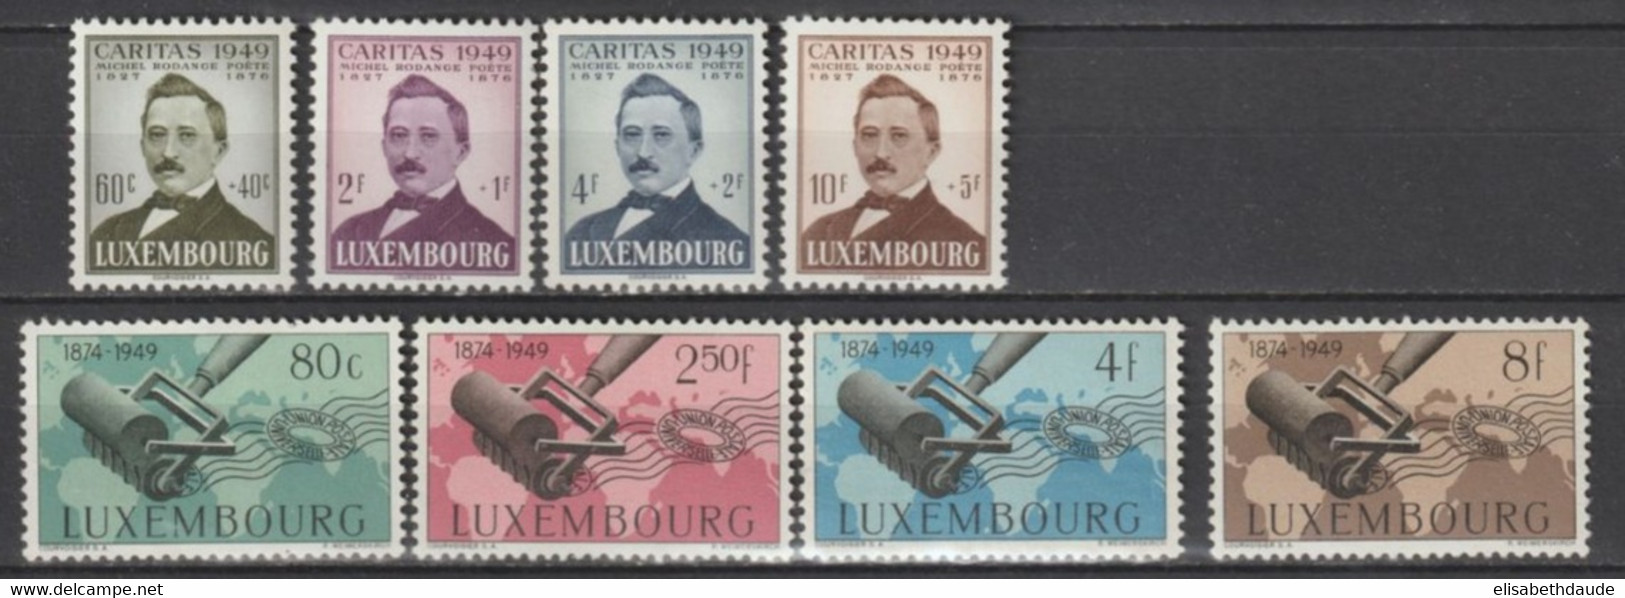 LUXEMBOURG - 1949 - ANNEE COMPLETE YVERT N°425/432 ** MNH (427 *MLH) - COTE = 60 EUR - Años Completos